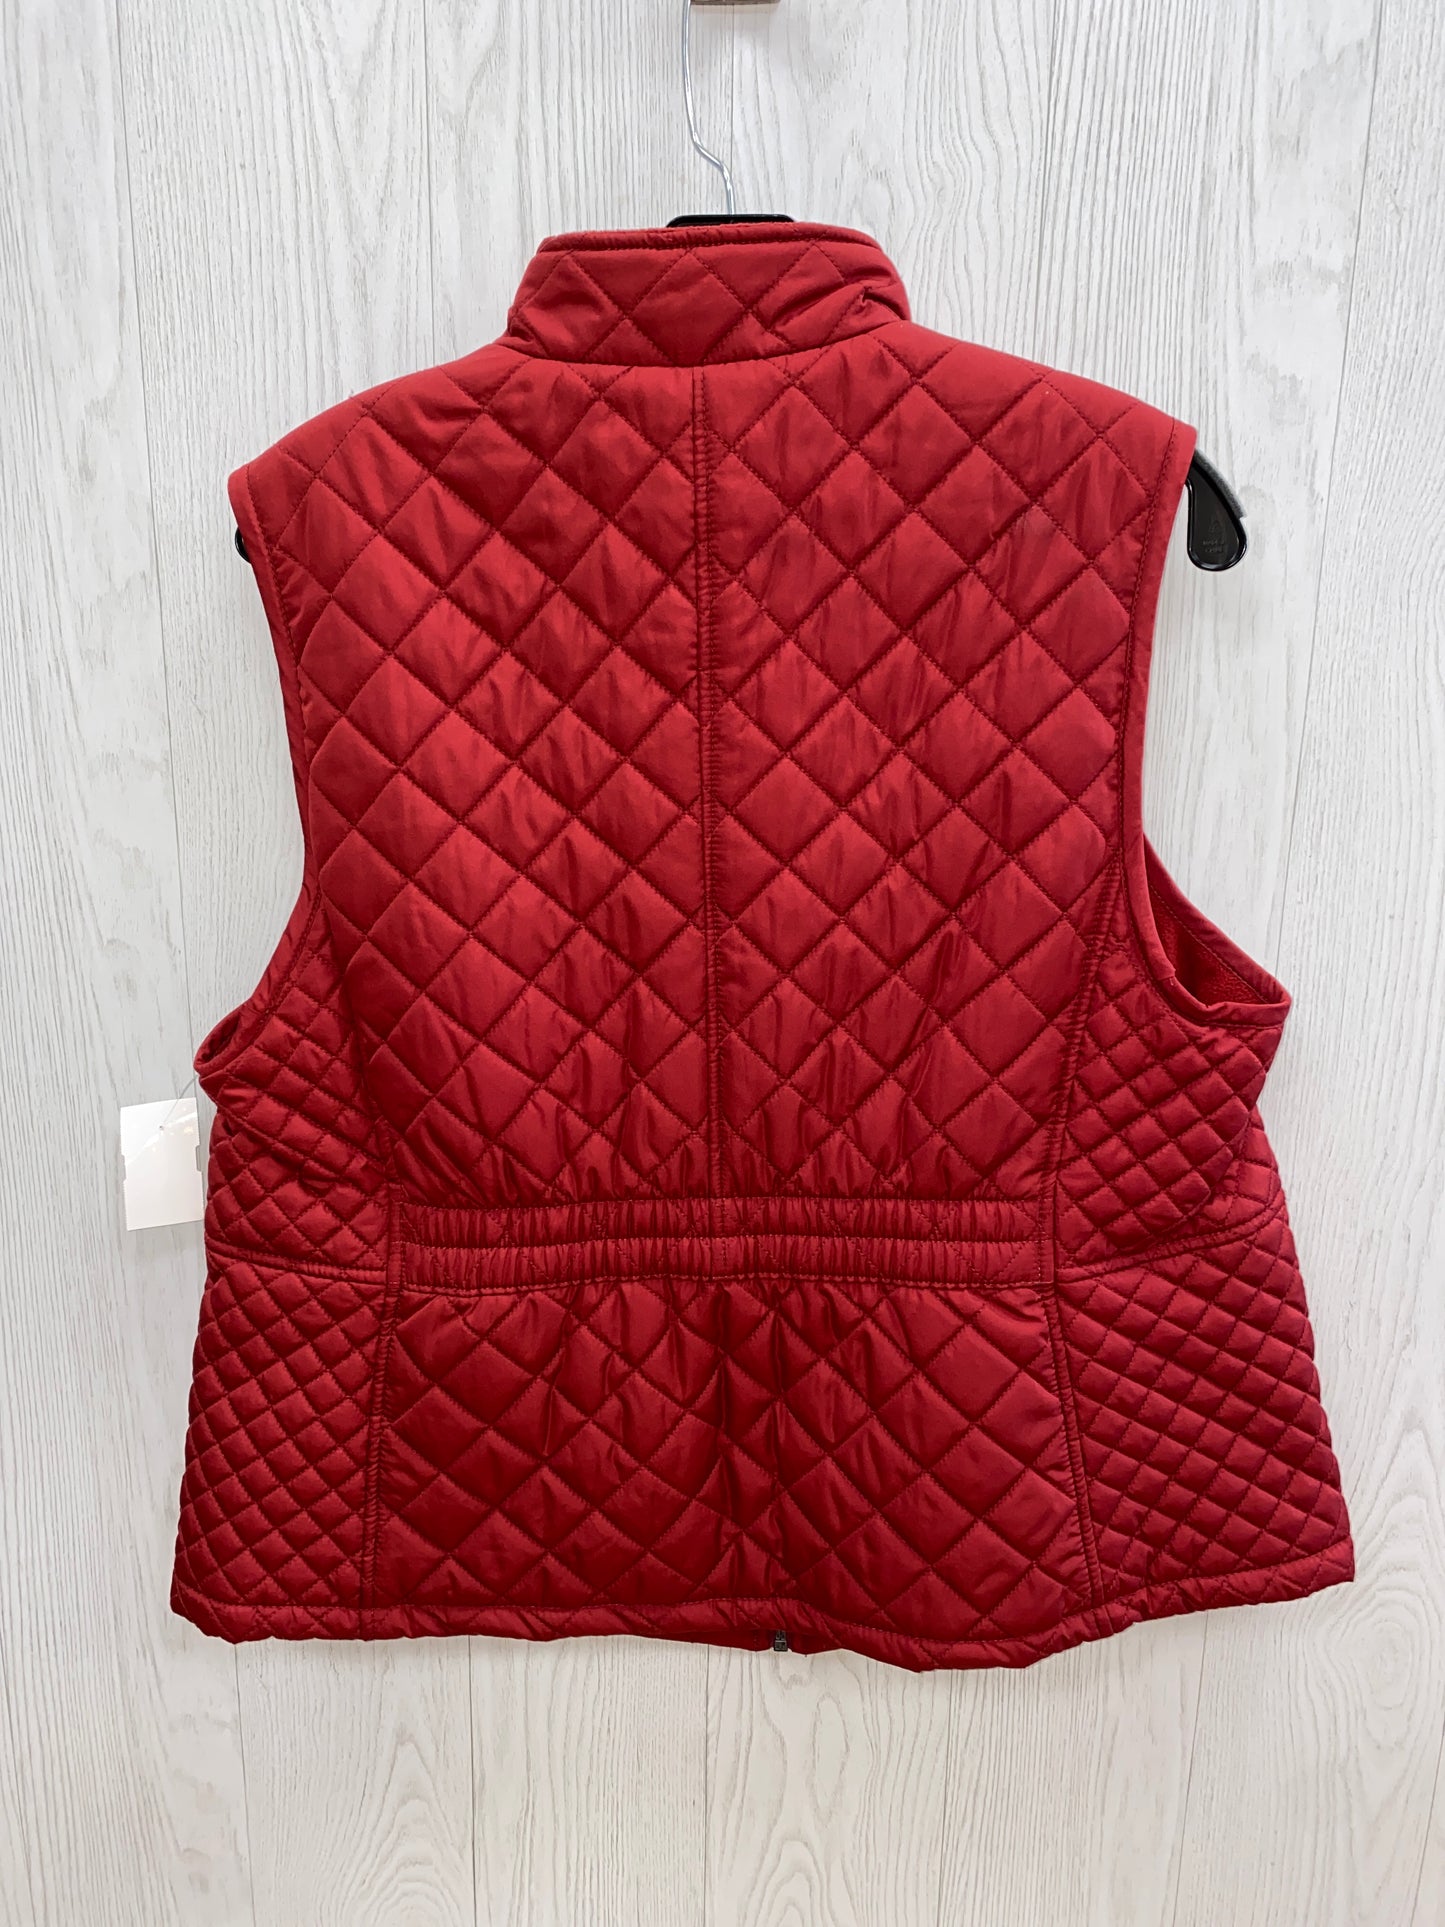 Vest Puffer & Quilted By Croft And Barrow O  Size: Xl